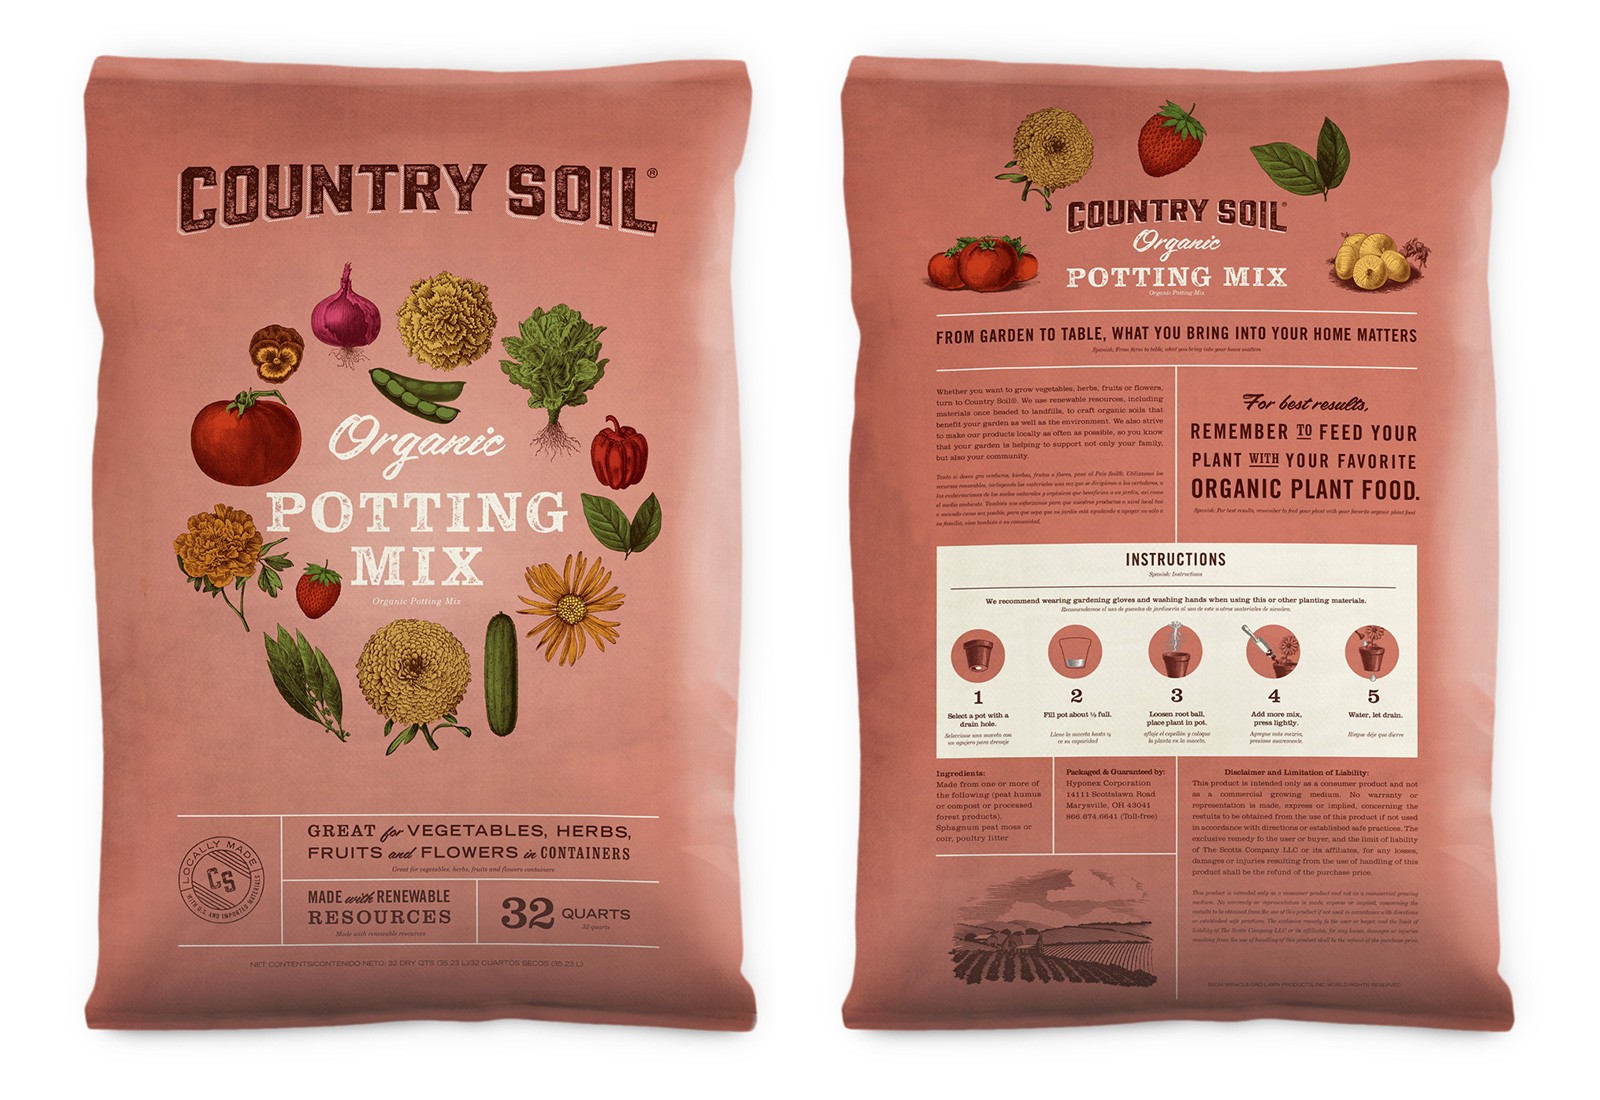 Agency Concept for Mid-tier Soil Packaging that Evokes Midwestern Values